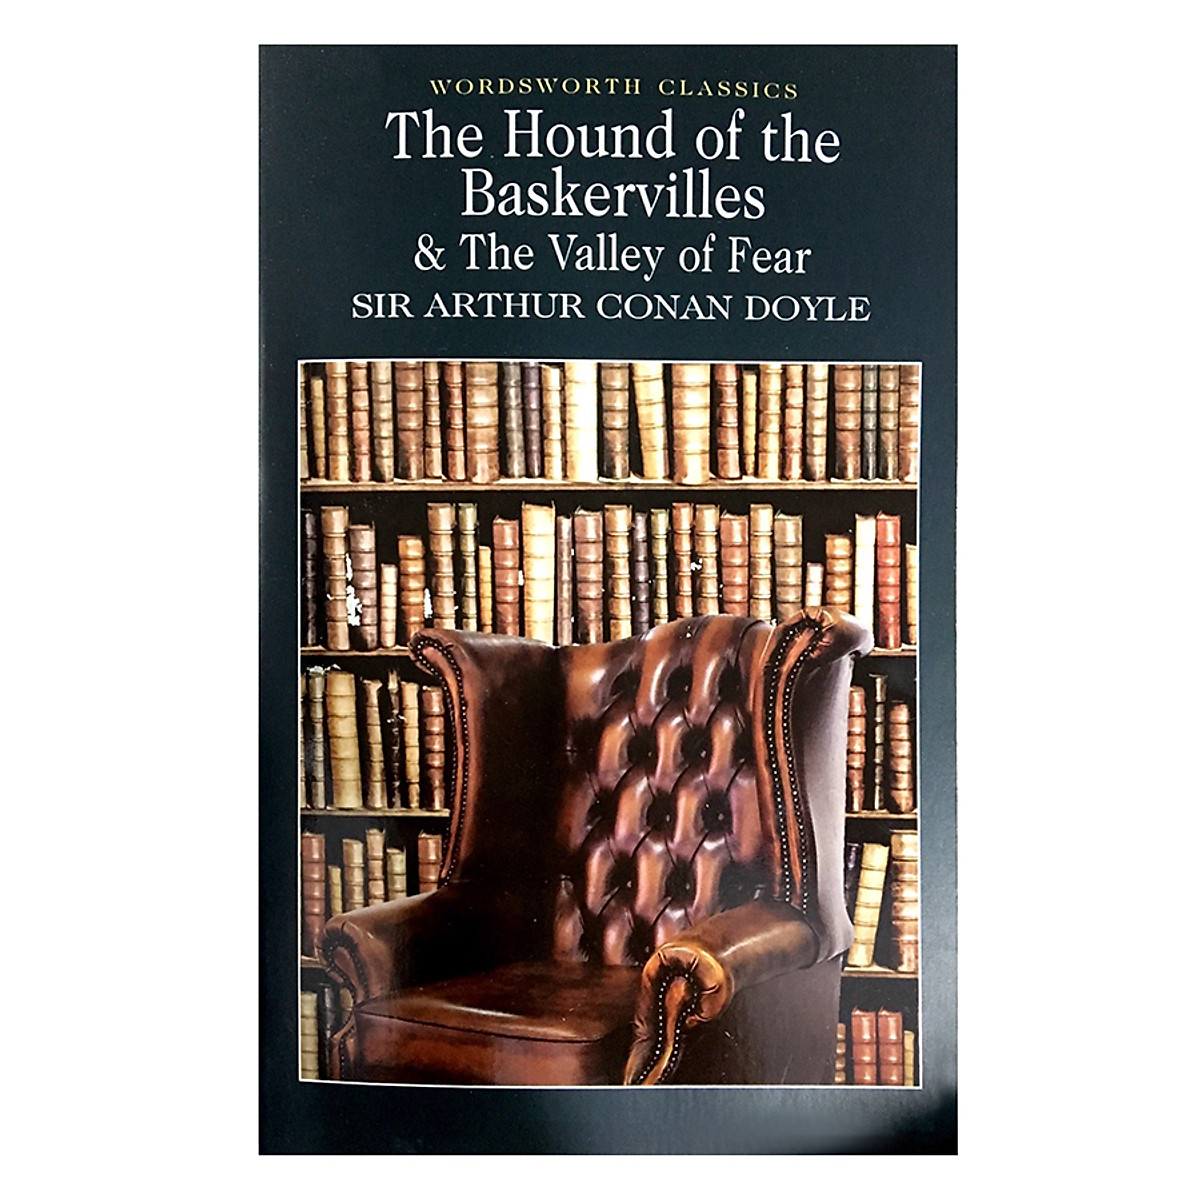 The Hound Of The Baskervilles (Paperback)